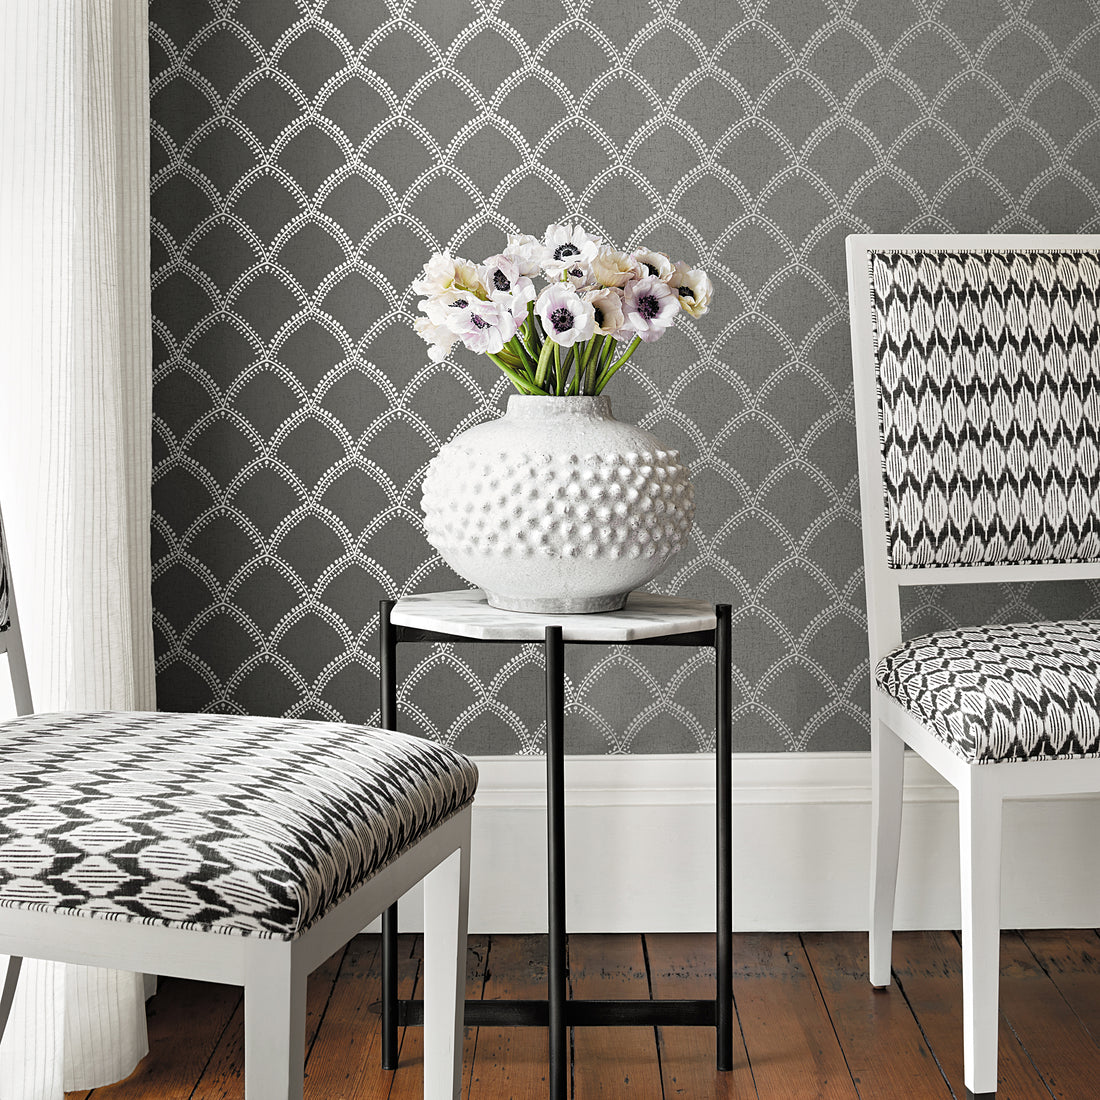 Lauderdale Chairs in Balin Ikat printed fabric in Black - pattern number AF73020 - by Anna French